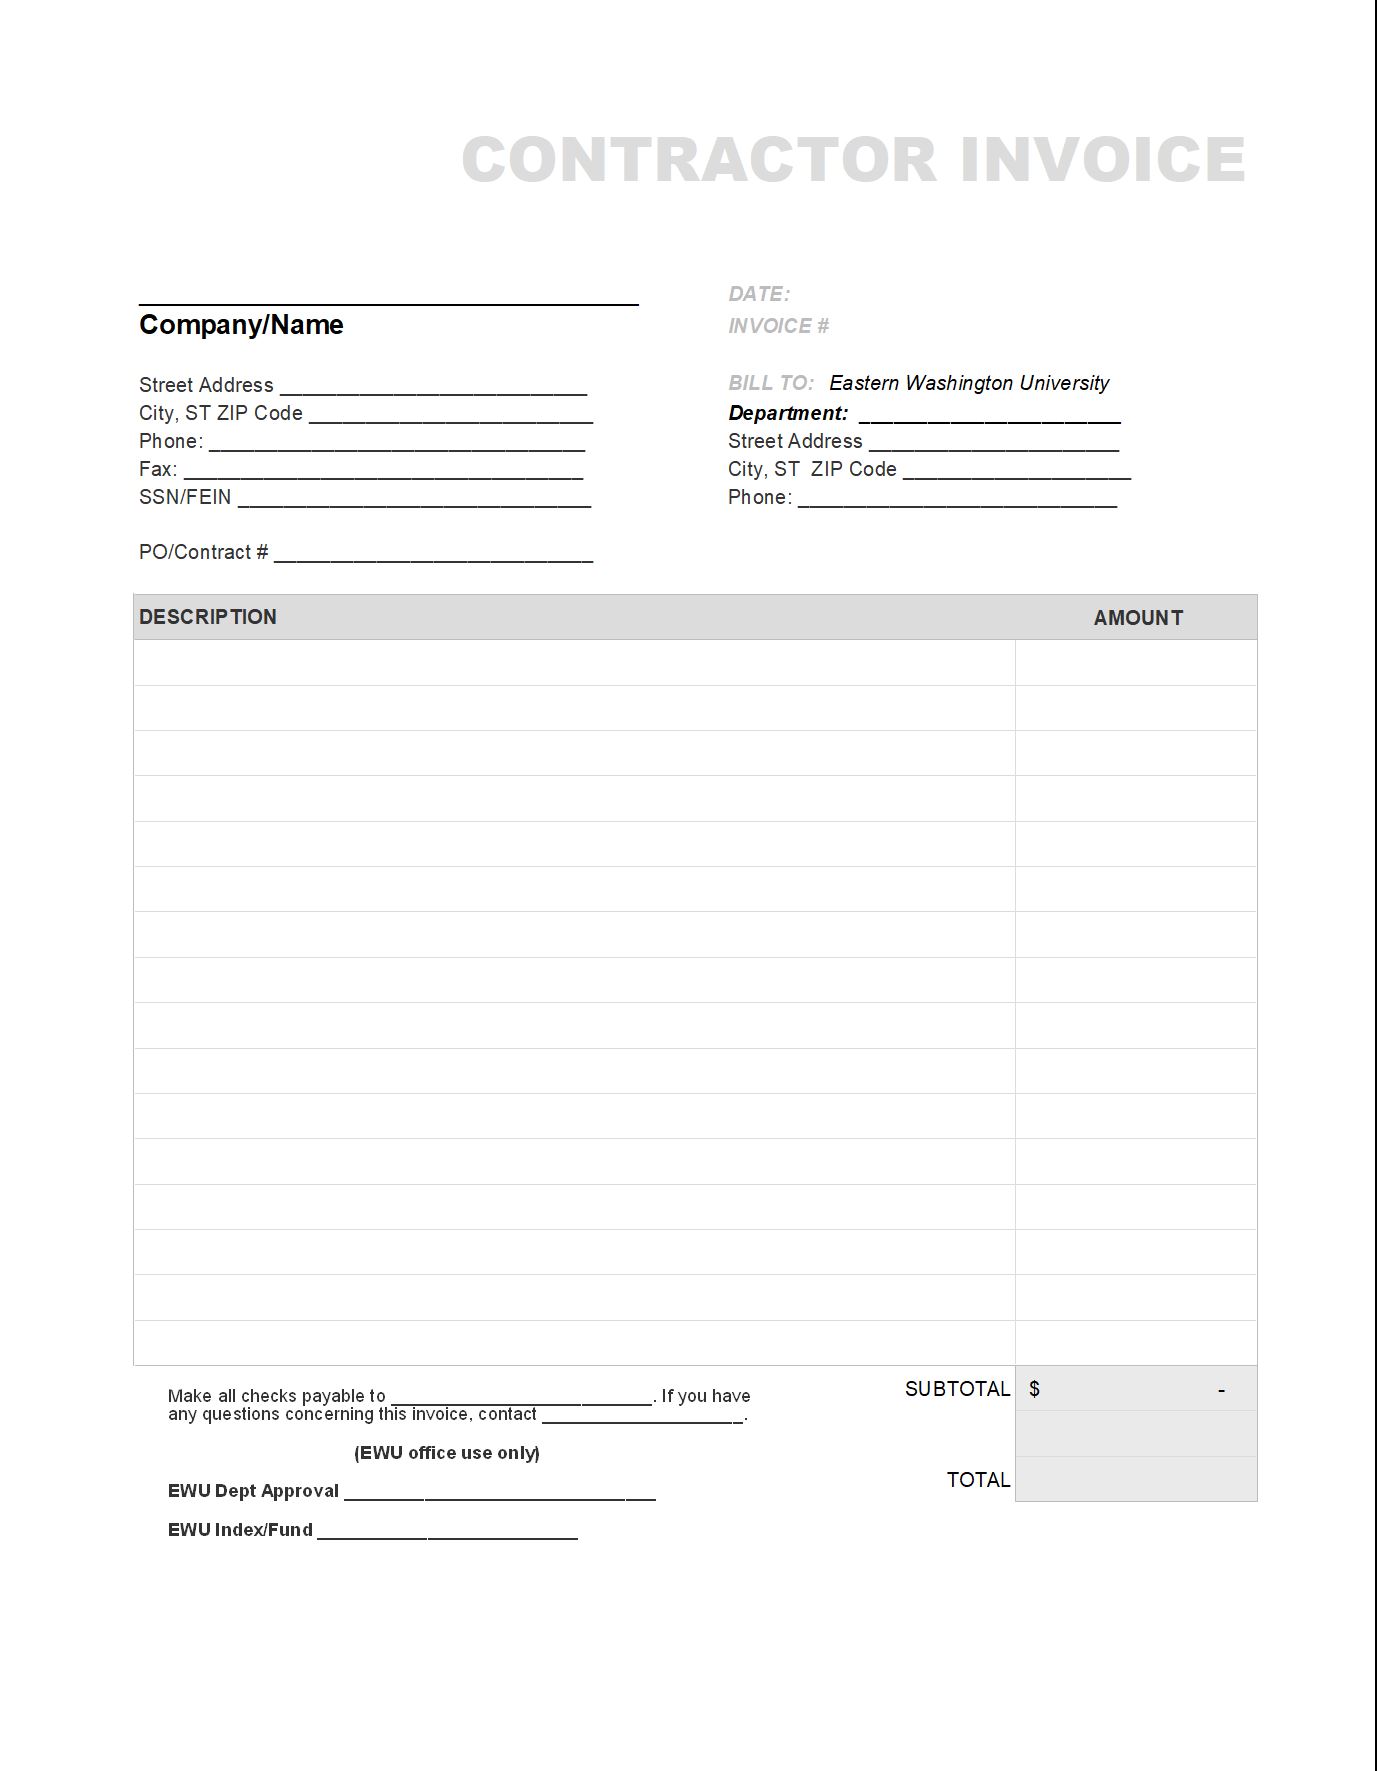 28 Independent Contractor Invoice Templates Free Independent contractor invoice template pdf